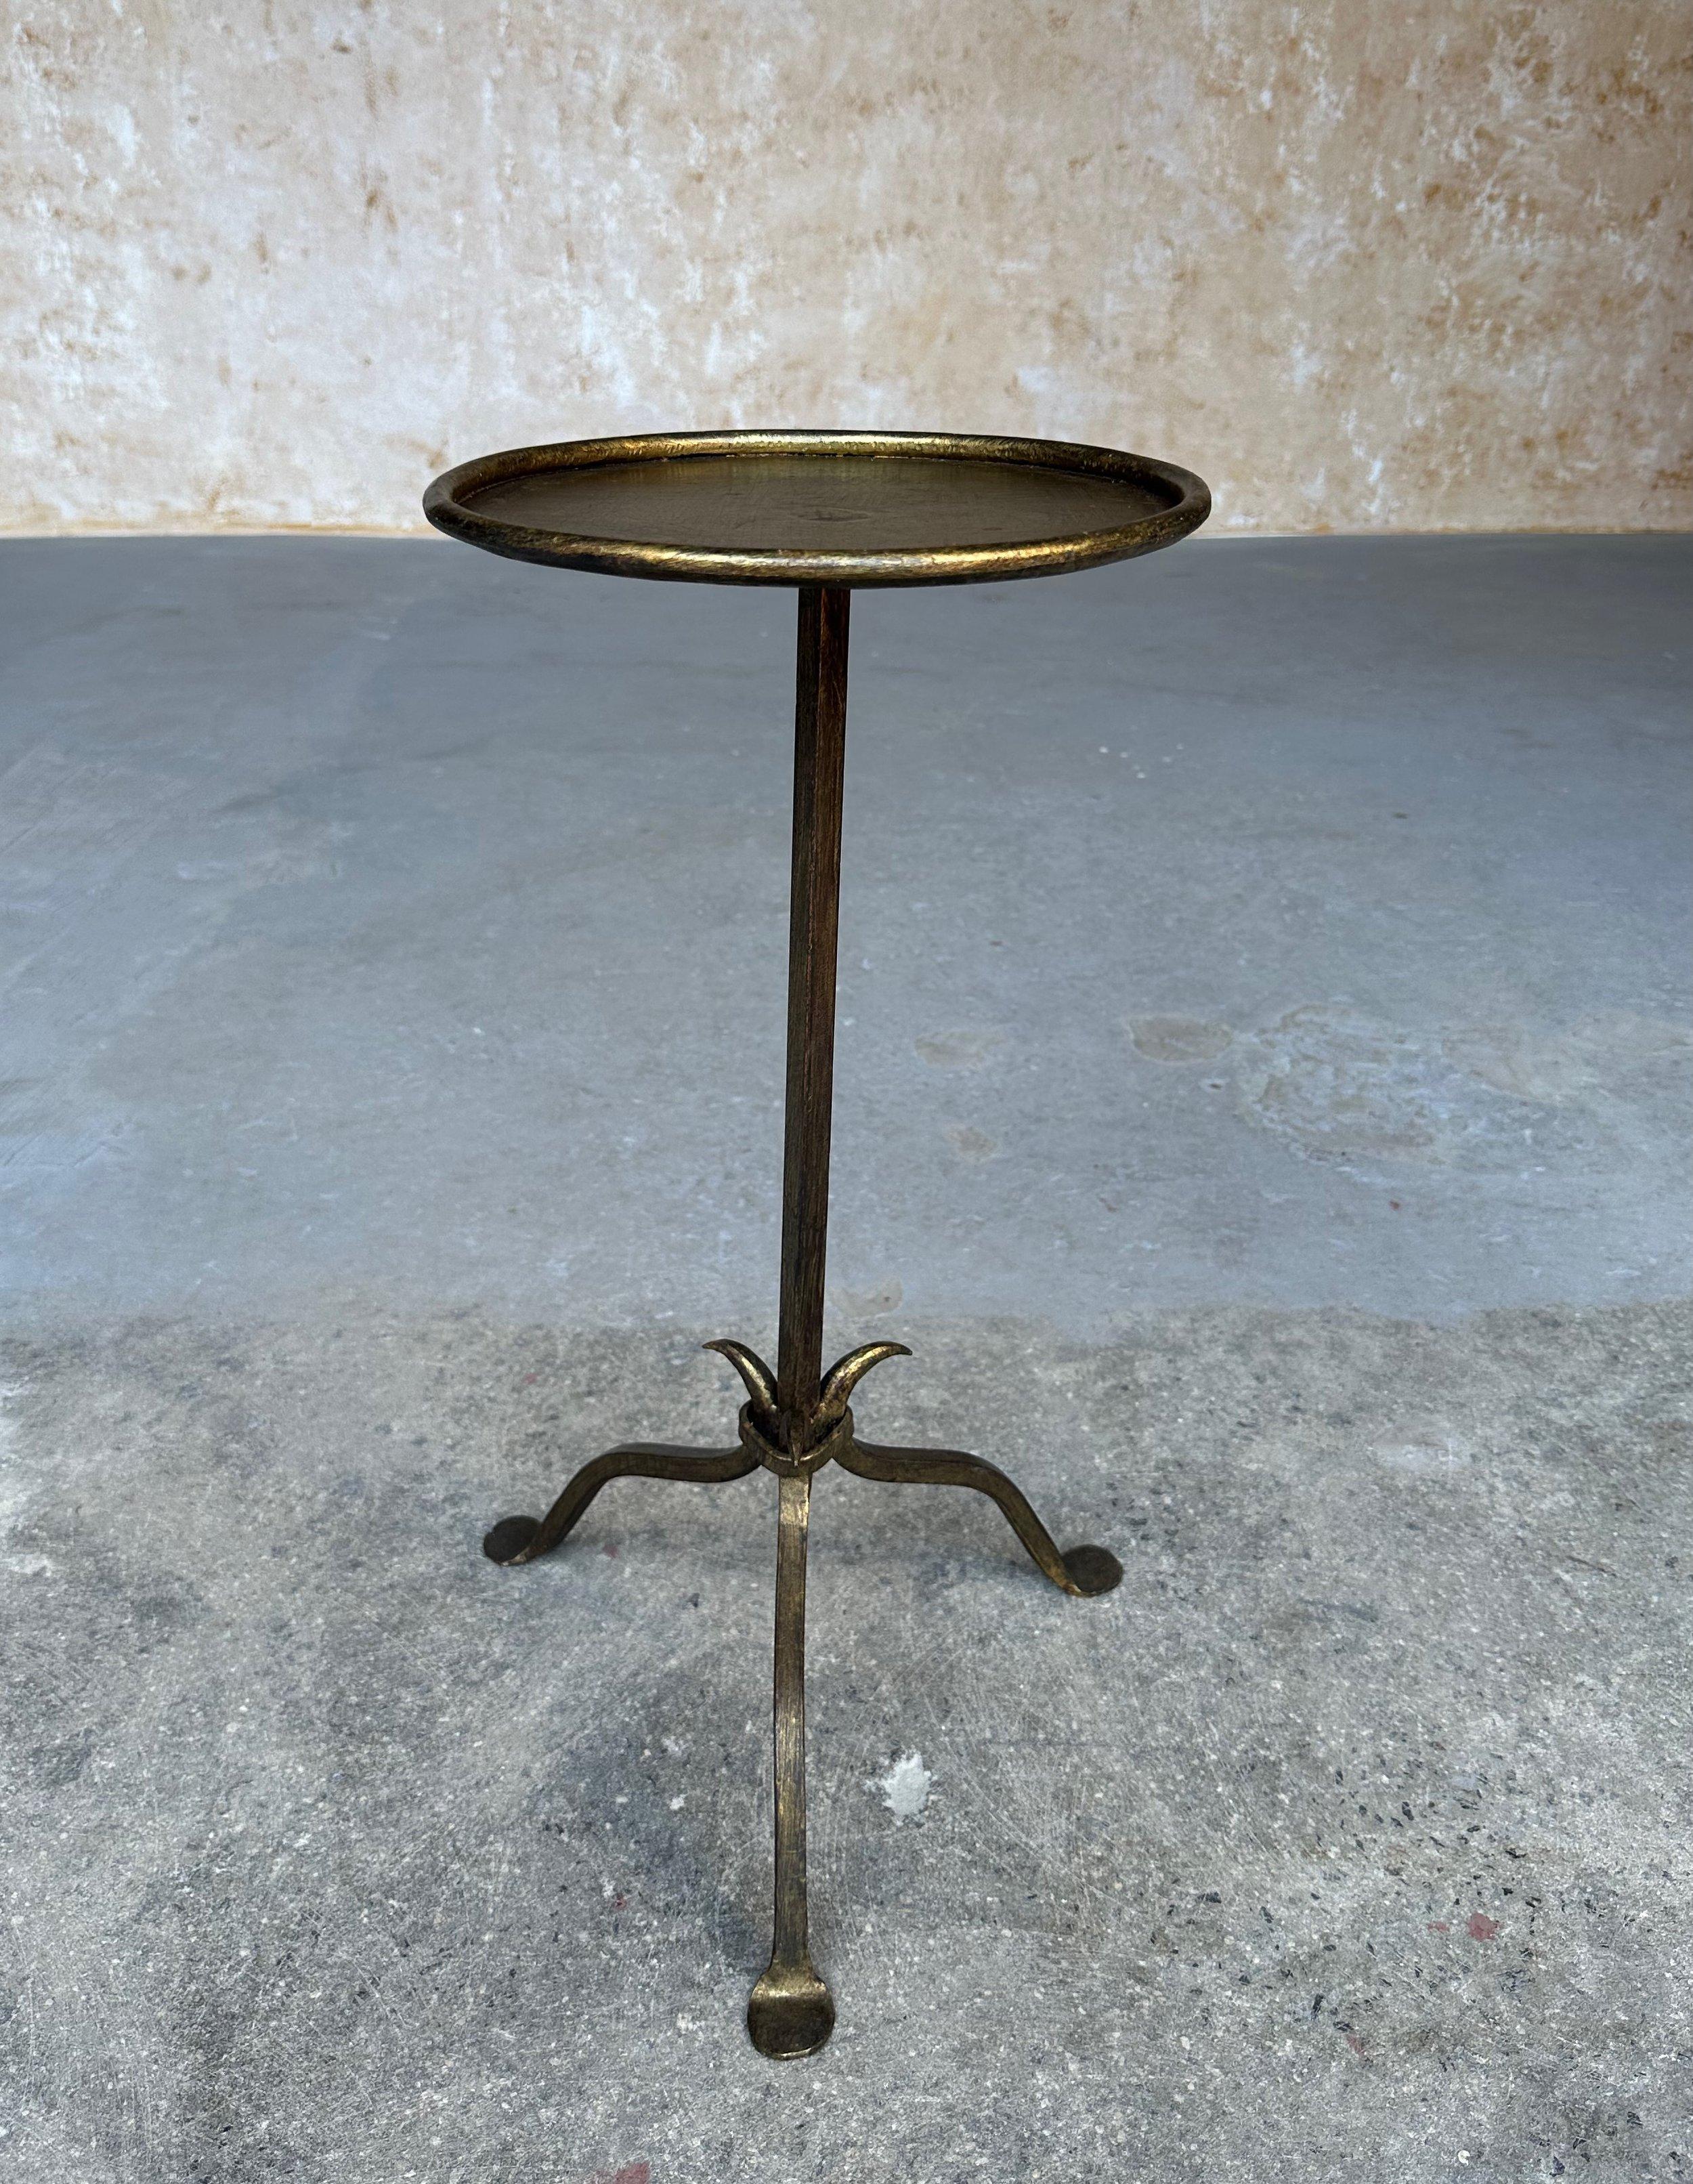 Recently crafted by skilled artisans using conventional iron-working techniques, this small iron and metal end table from Spain features a distinctive design with a central stem that tapers to a fine point, attached to a tripod base that comprises